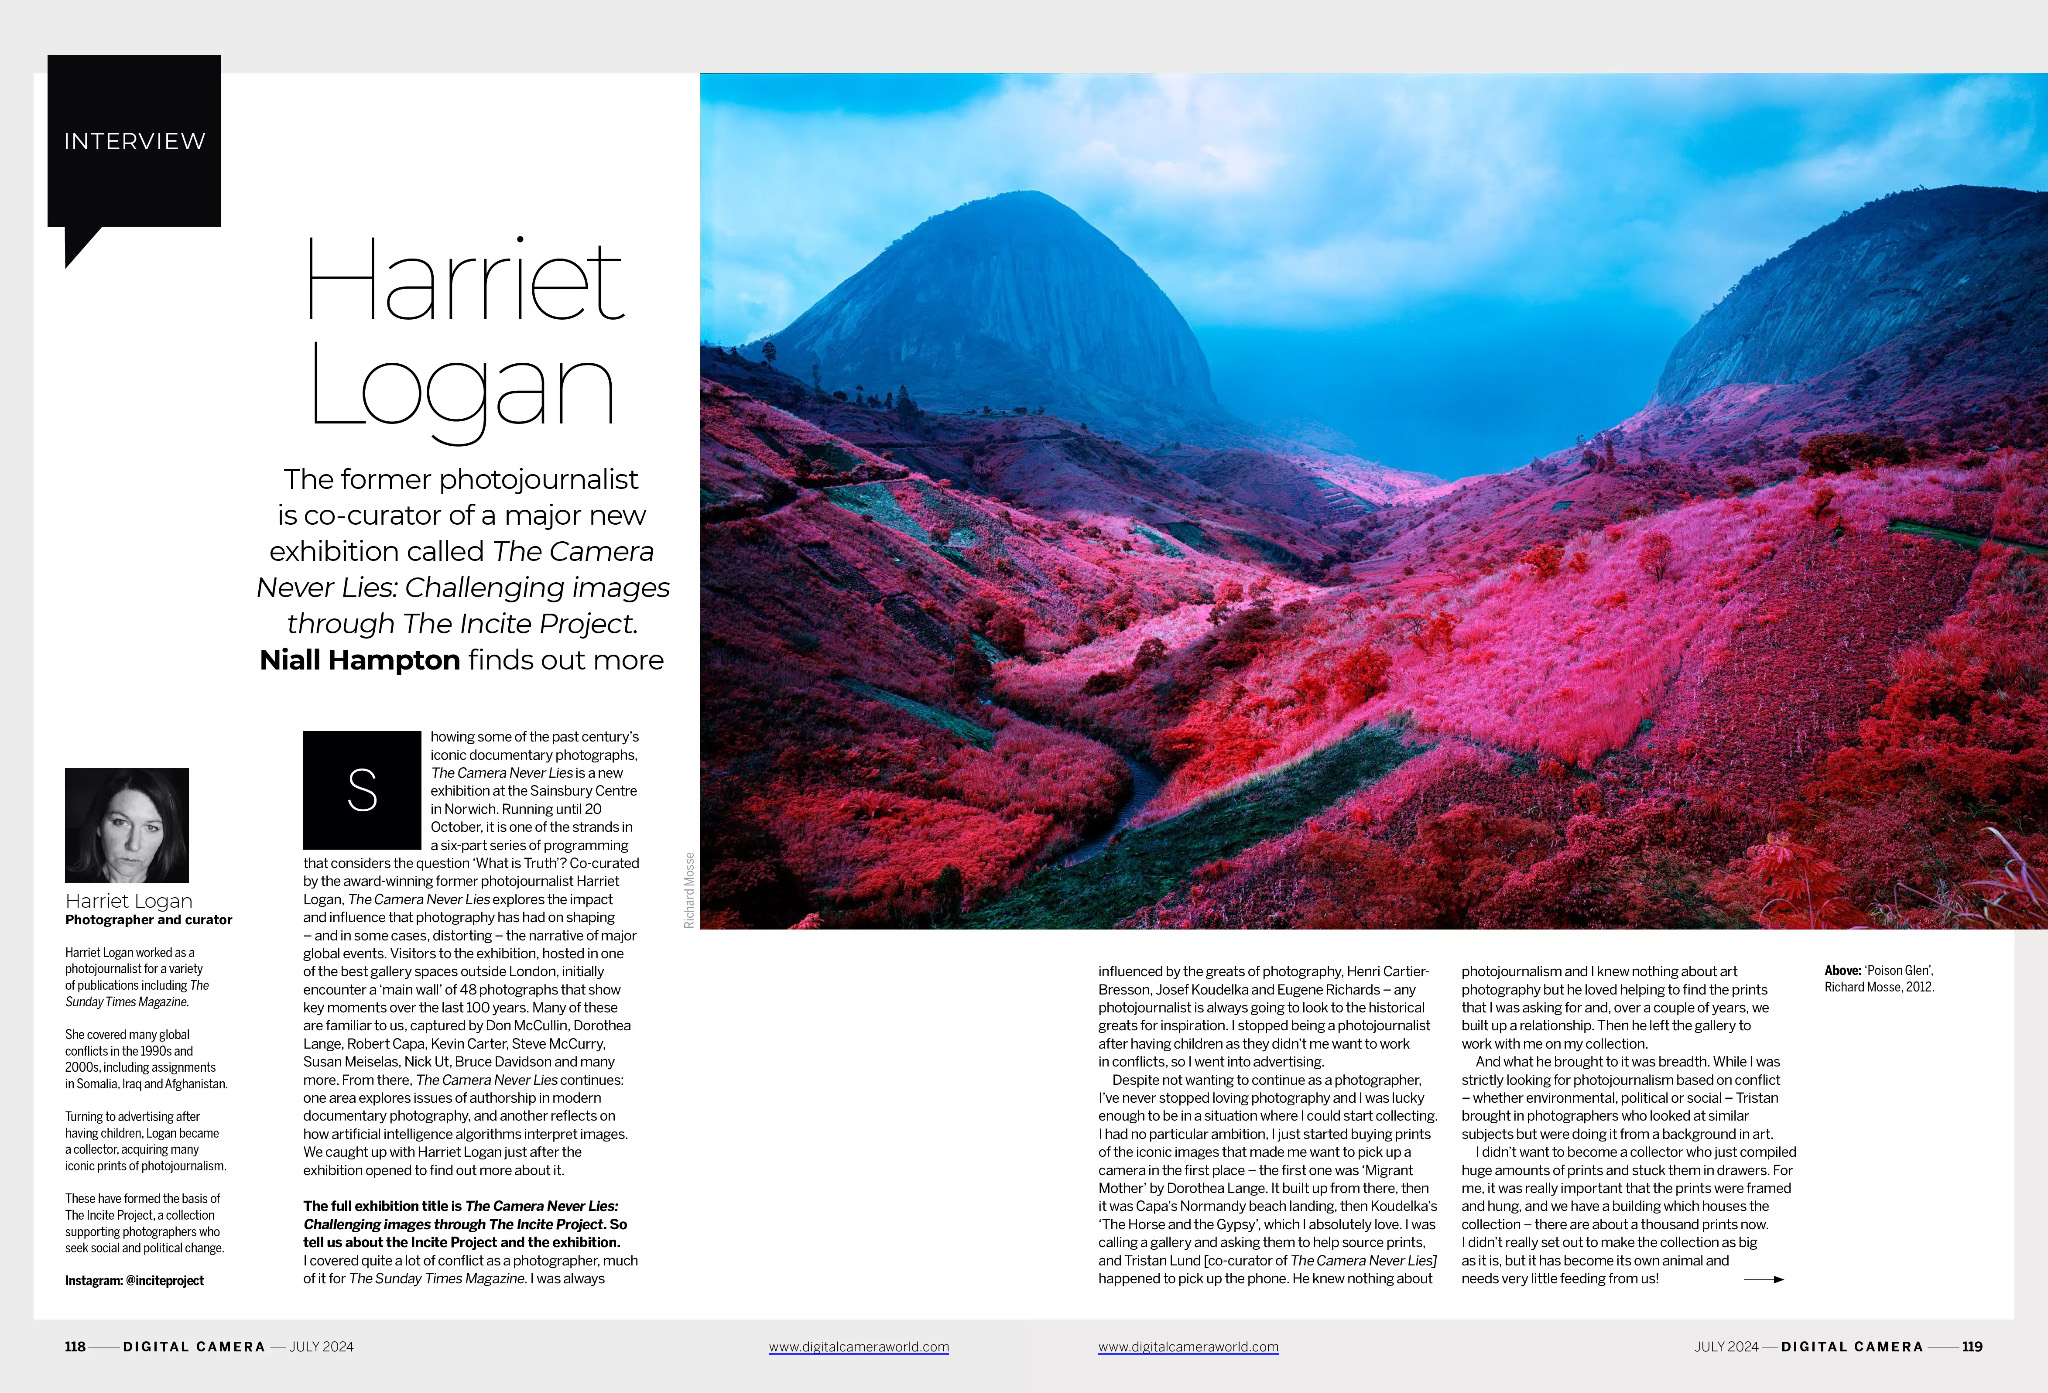 Opening two pages of the main interview, with photography curator and former photojournalist Harriet Logan, in the July 2024 issue of Digital Camera magazine